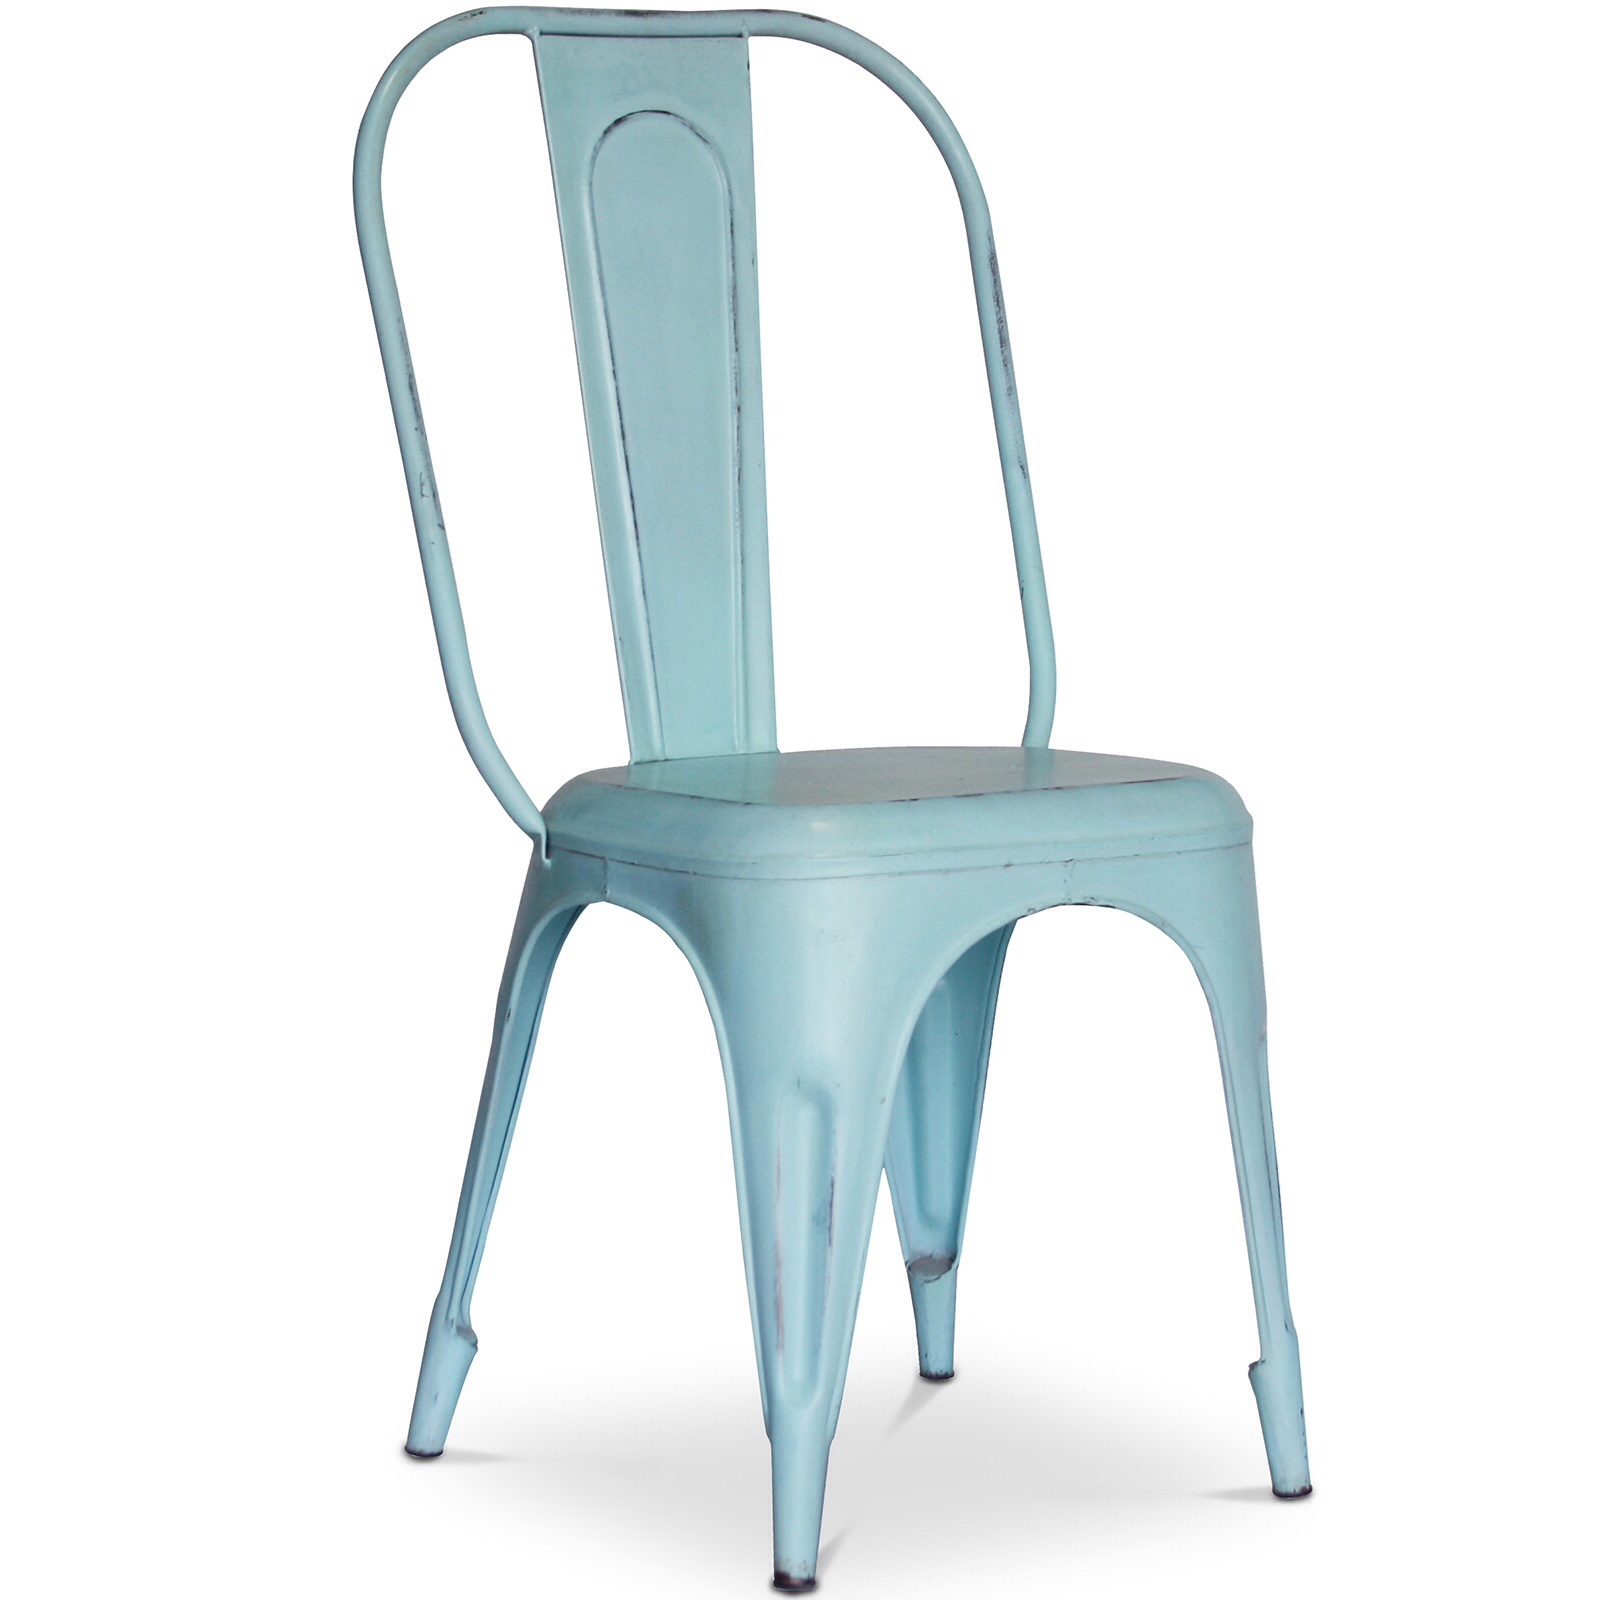 Bistro Retro Chair 450 mm high weathered Light Blue